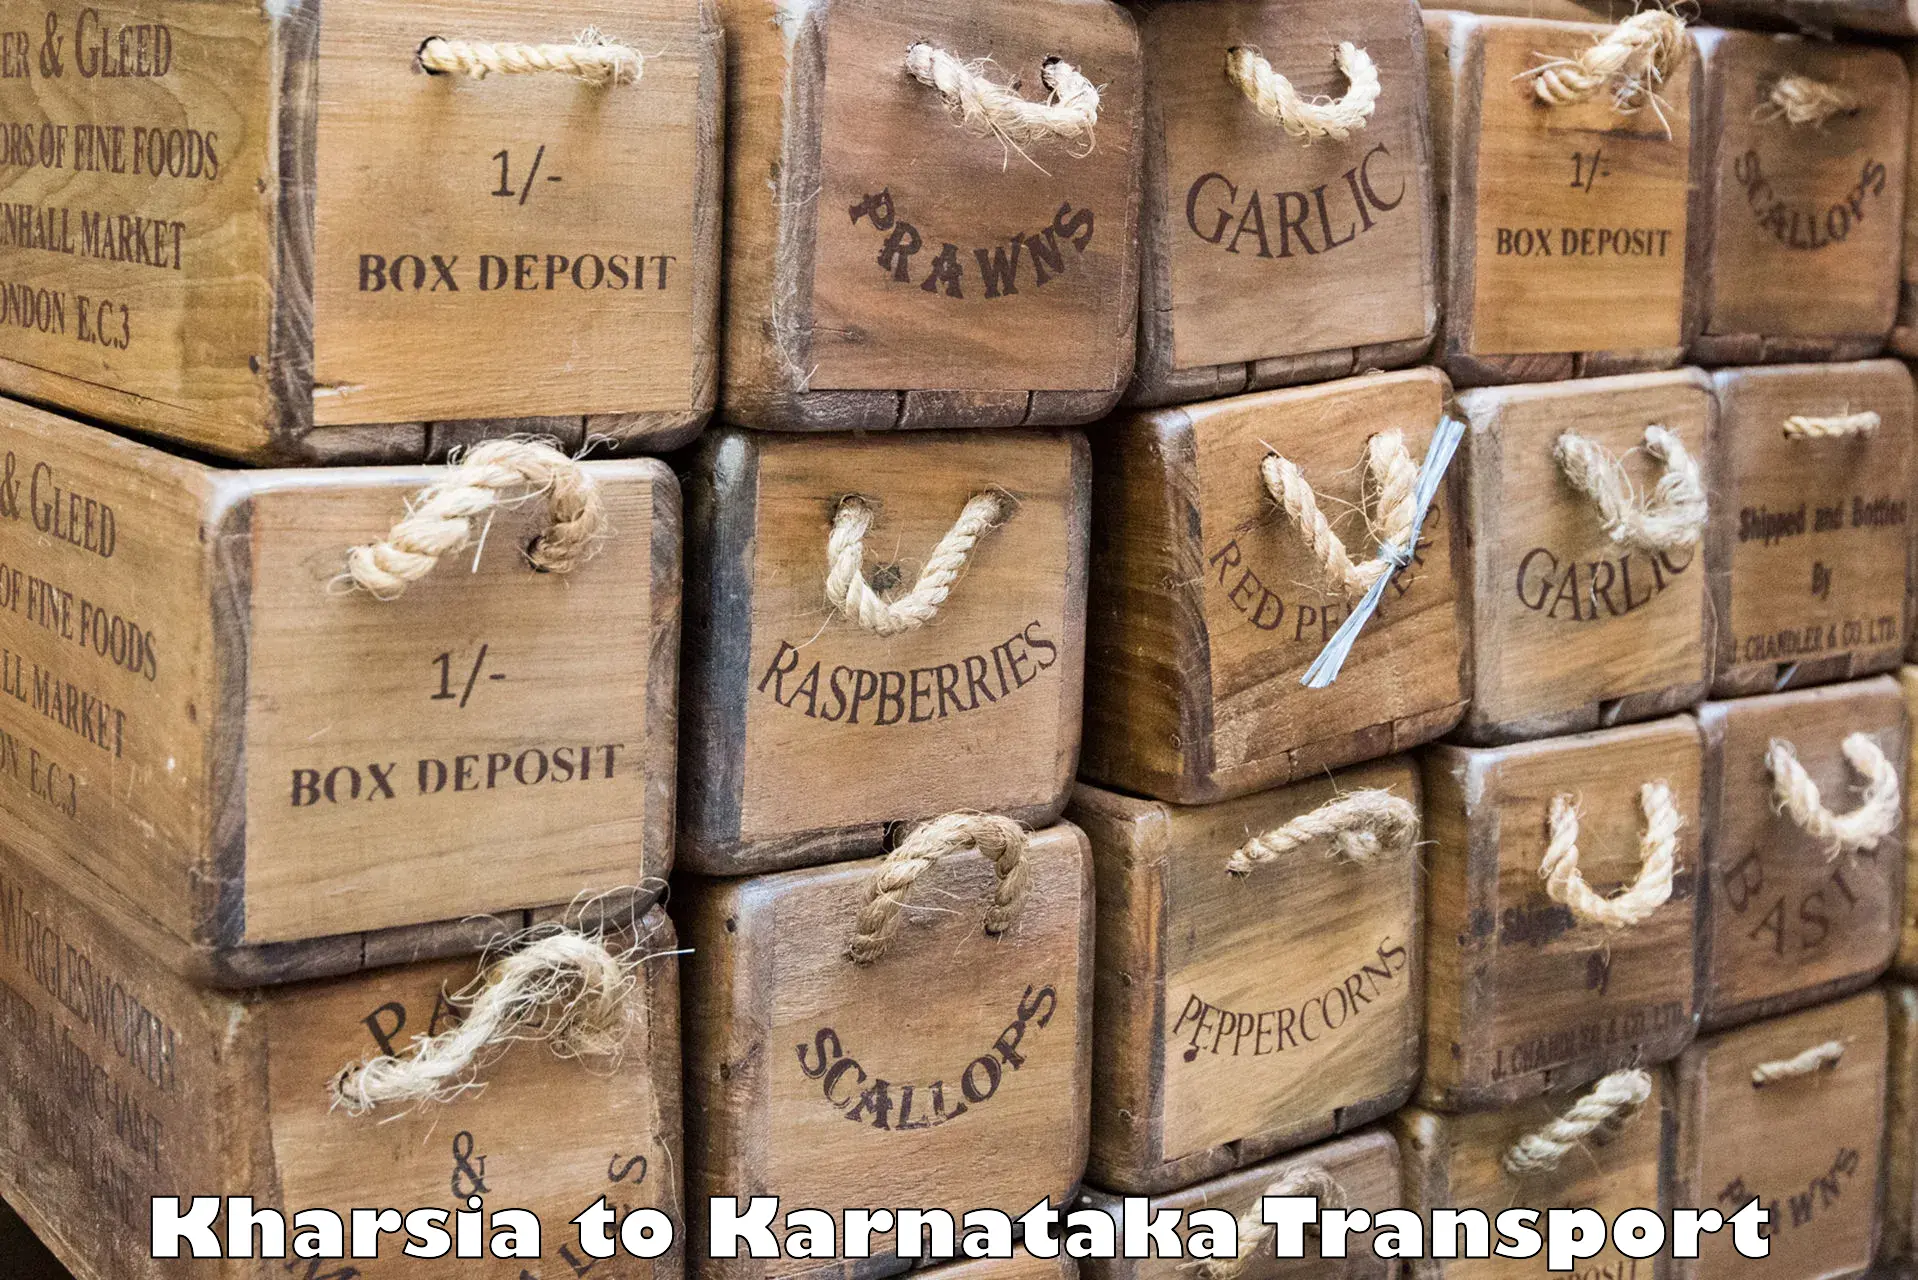 Air freight transport services Kharsia to Shiralakoppa